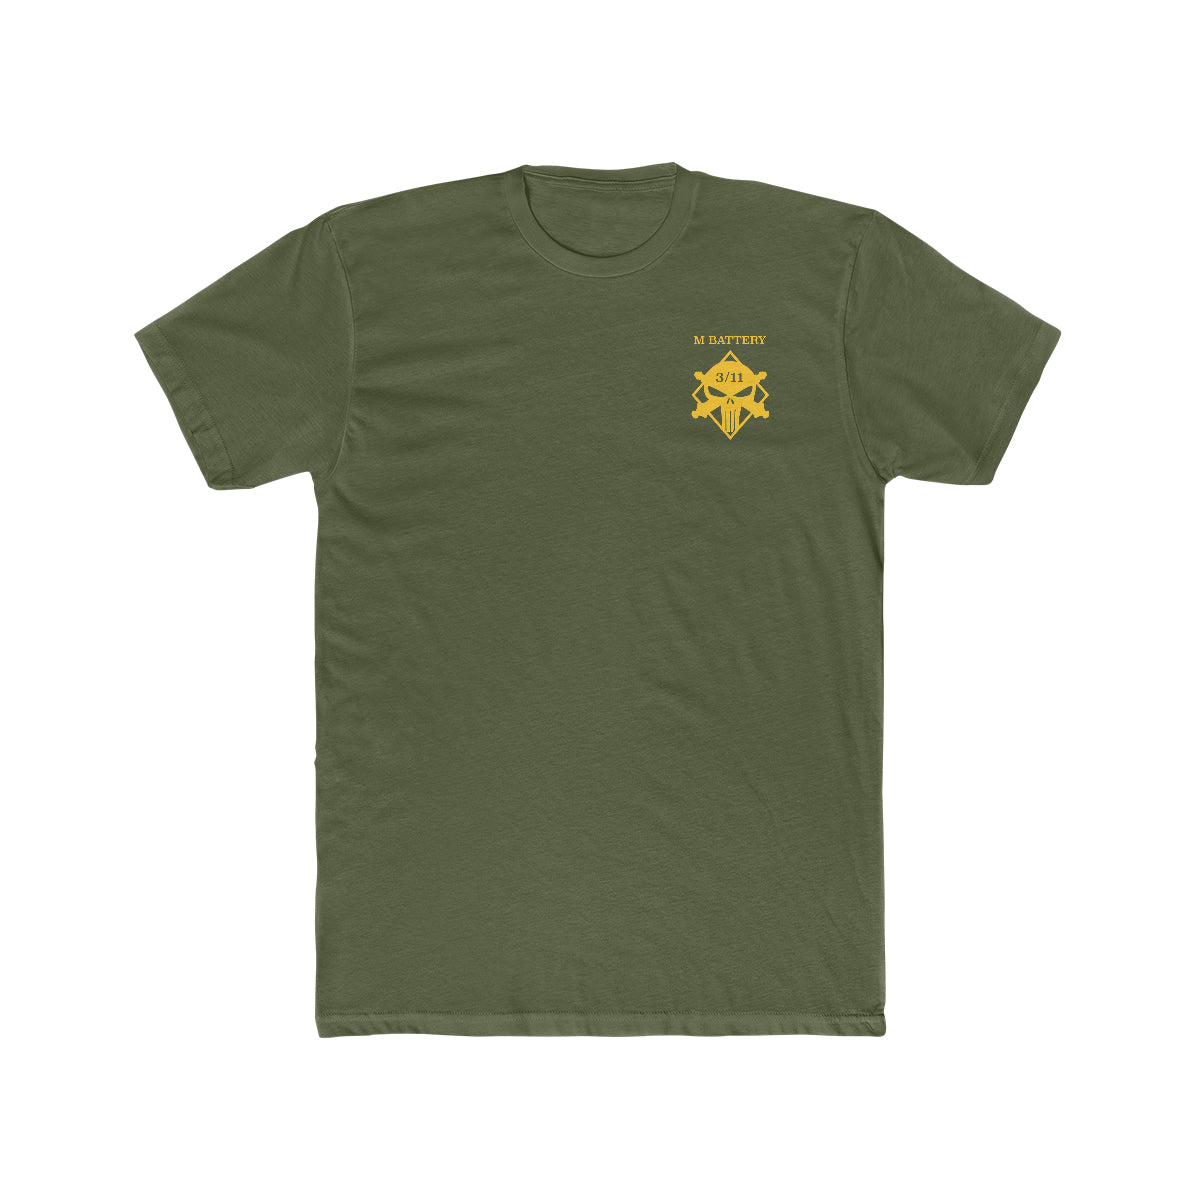 Mike Battery 3rd Battalion 11th Marine Regiment Tee